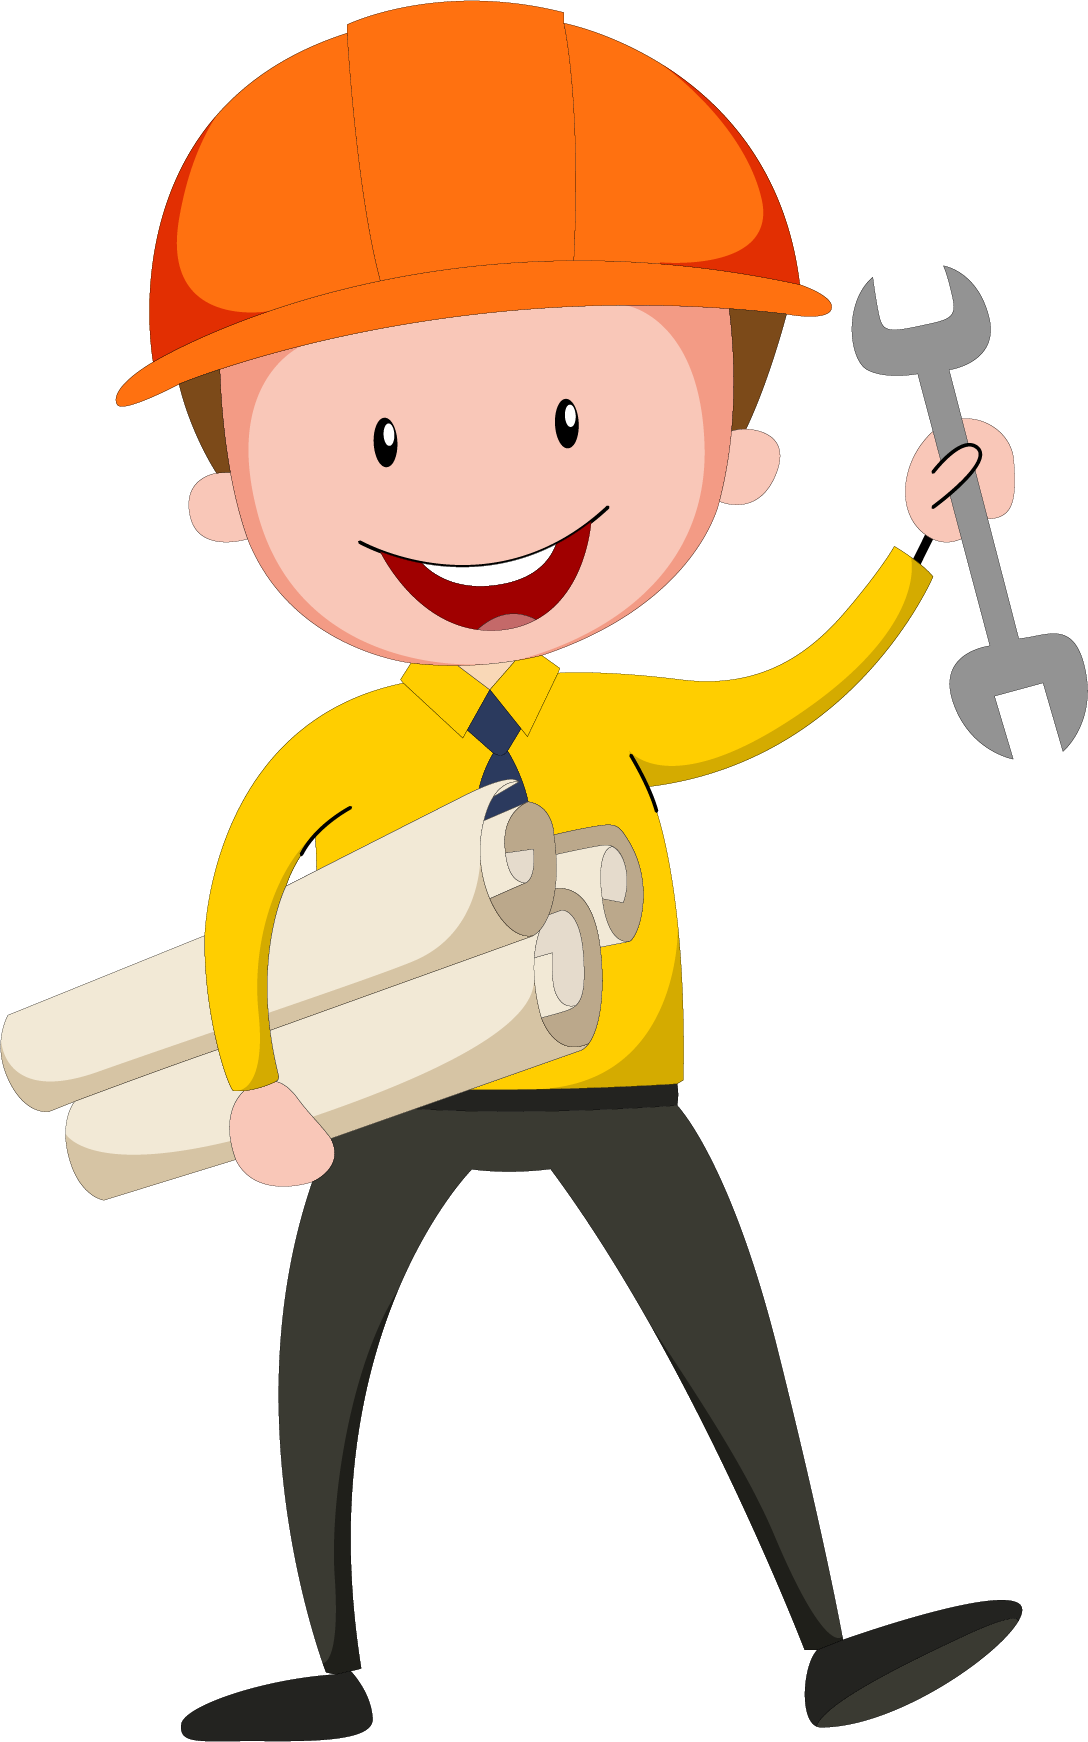 Engineer PNG Transparent Images | PNG All